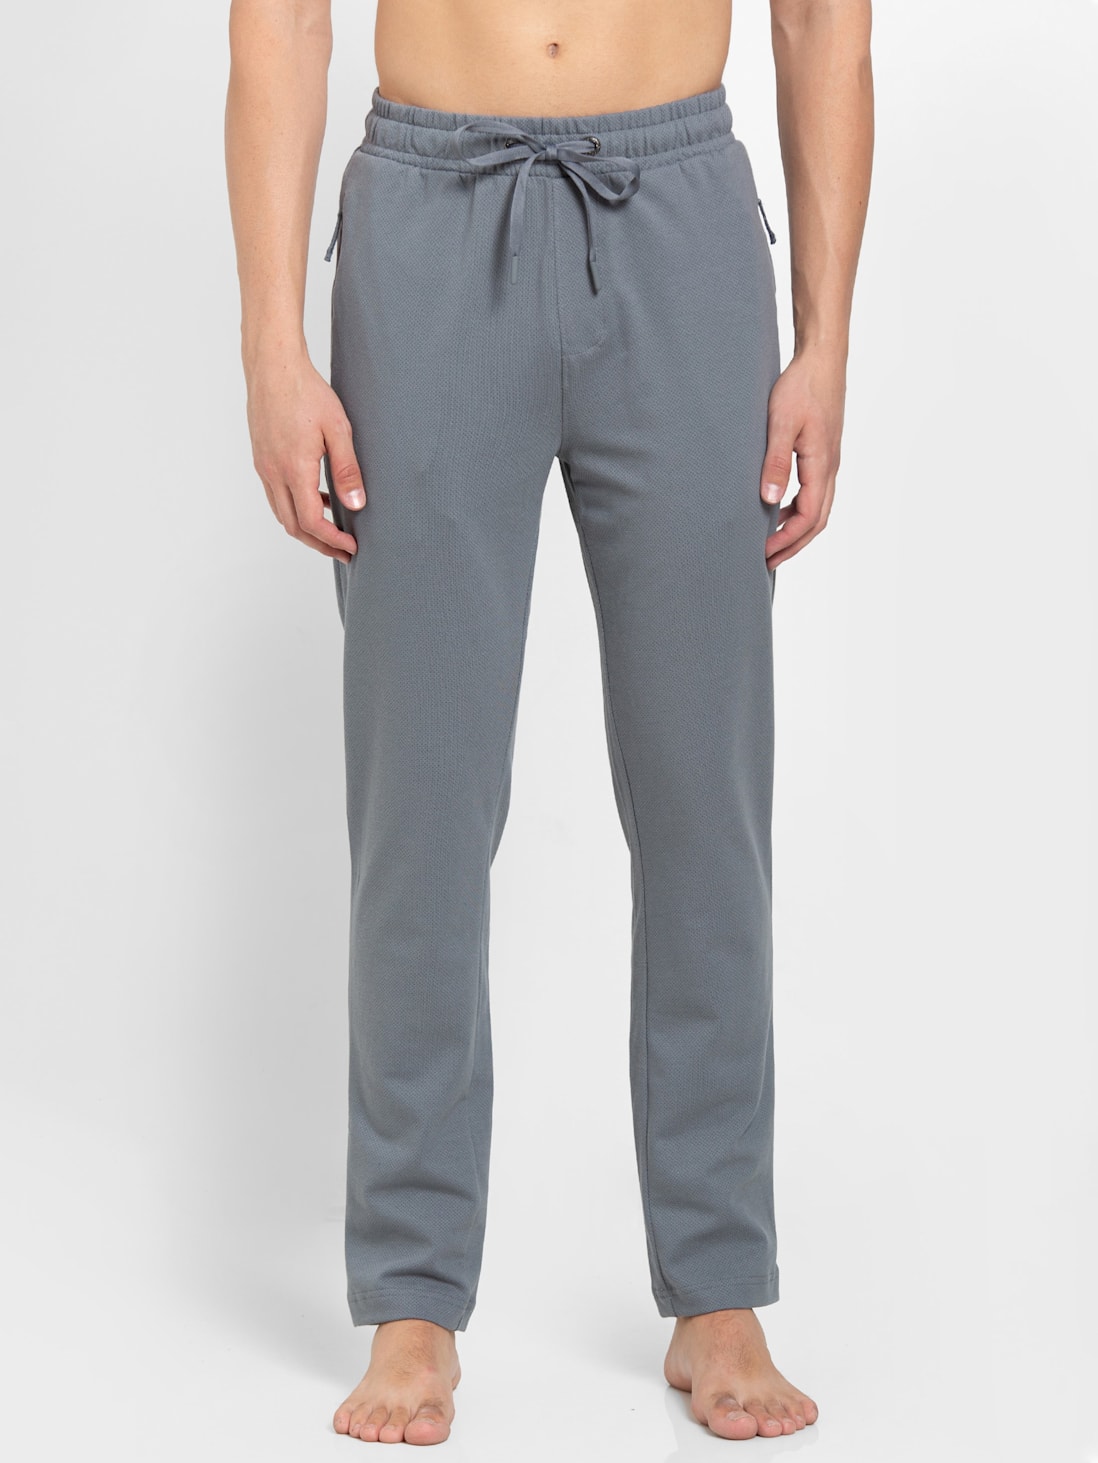 Jockey Cotton Track Pants in Rohtak - Dealers, Manufacturers & Suppliers -  Justdial